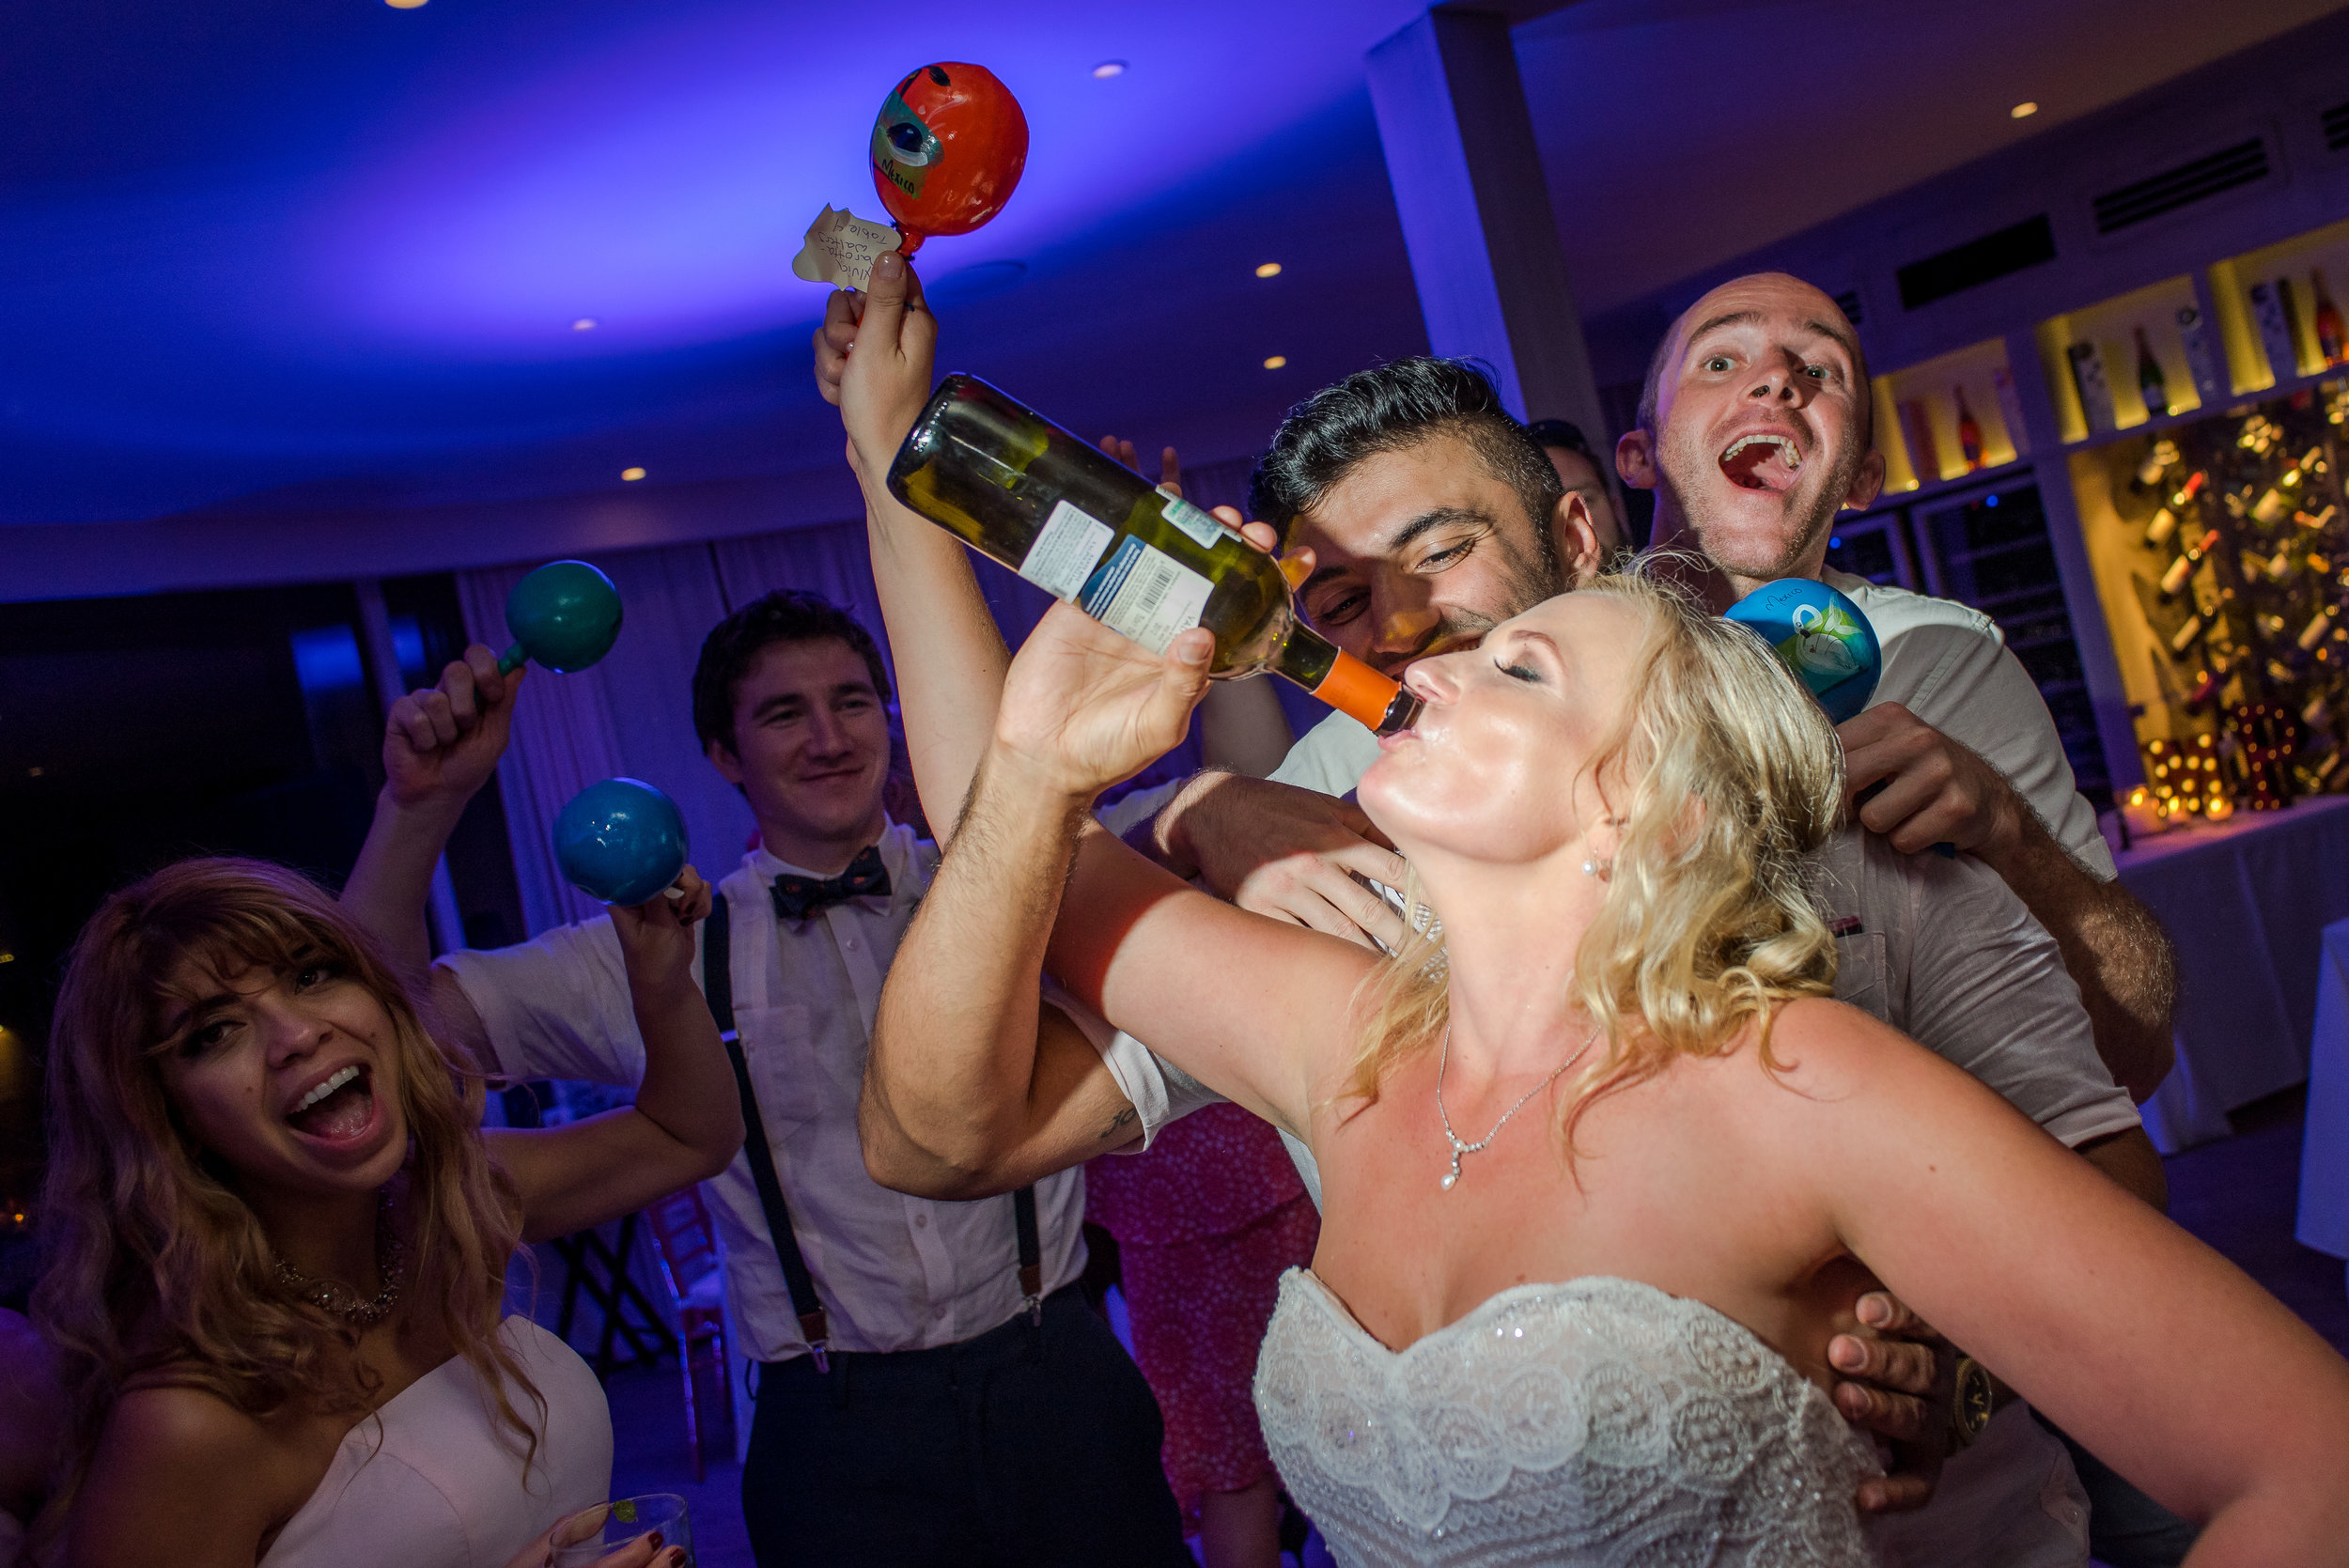 Bride drinking from the bootle and having a great time at her wedding party on the dance floor at sunset Monalisa